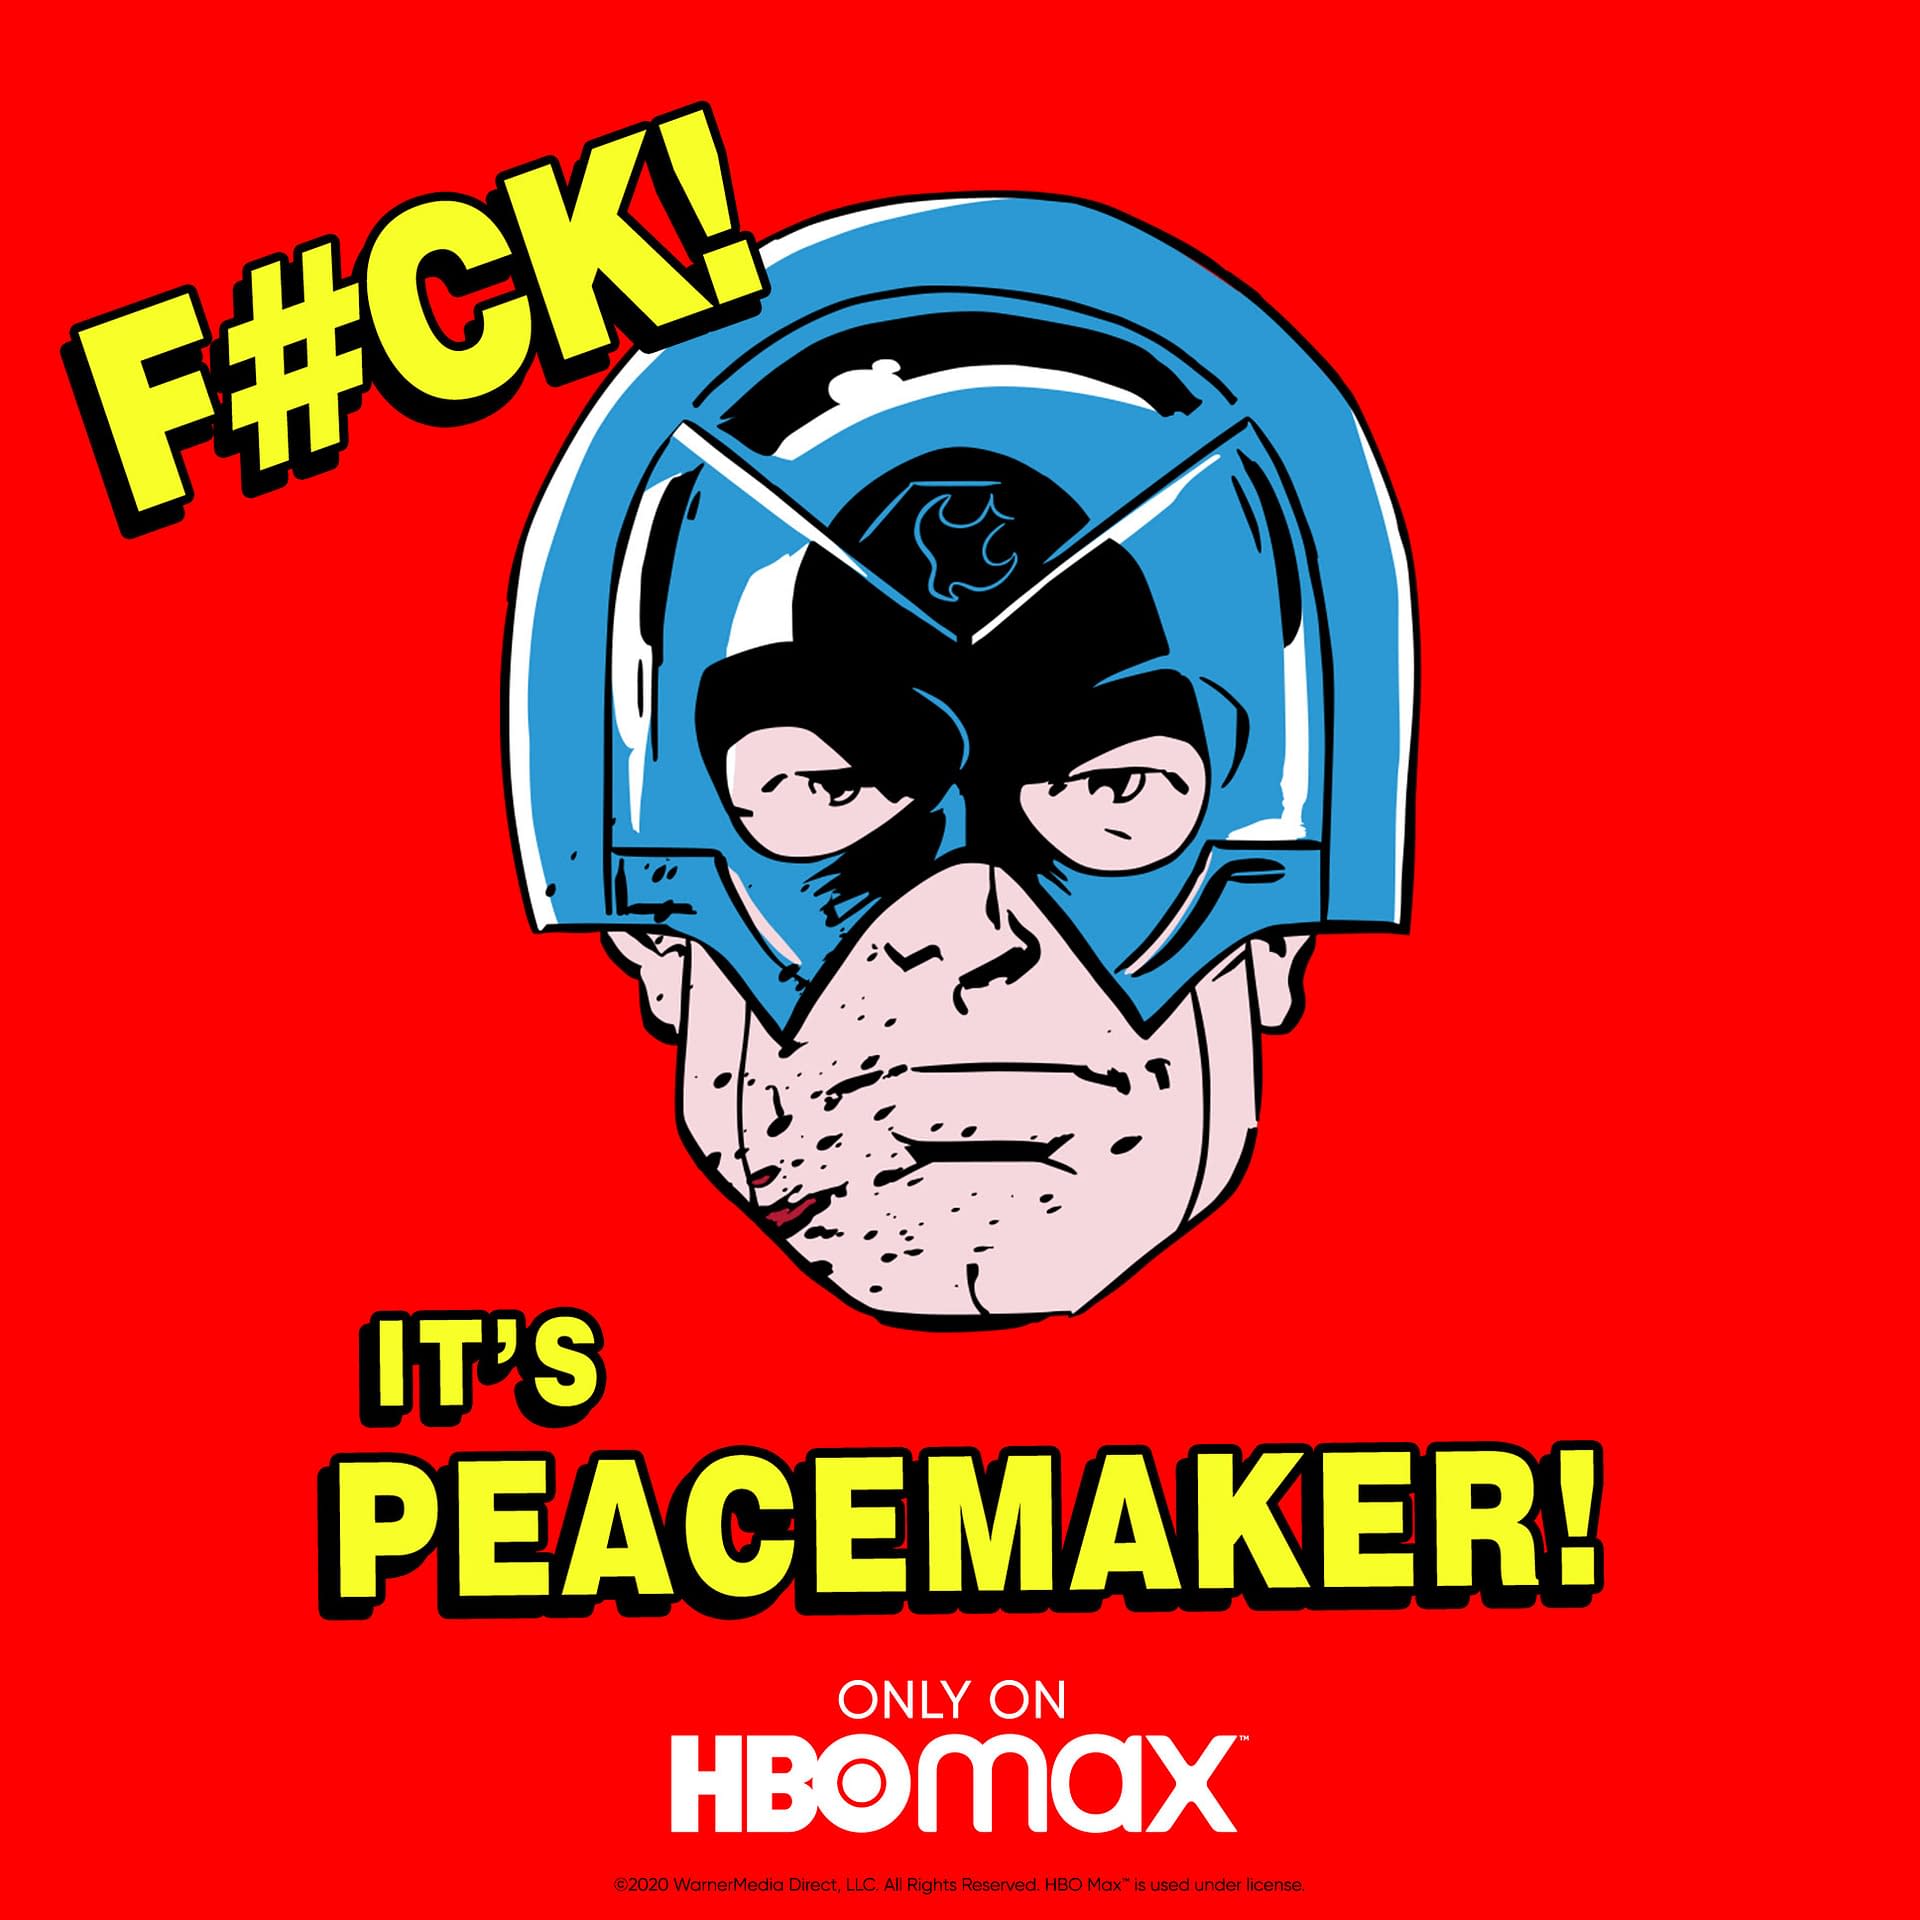 HBO Max Rips Off John Byrne and Marvel For Suicide Squad's Peacemaker